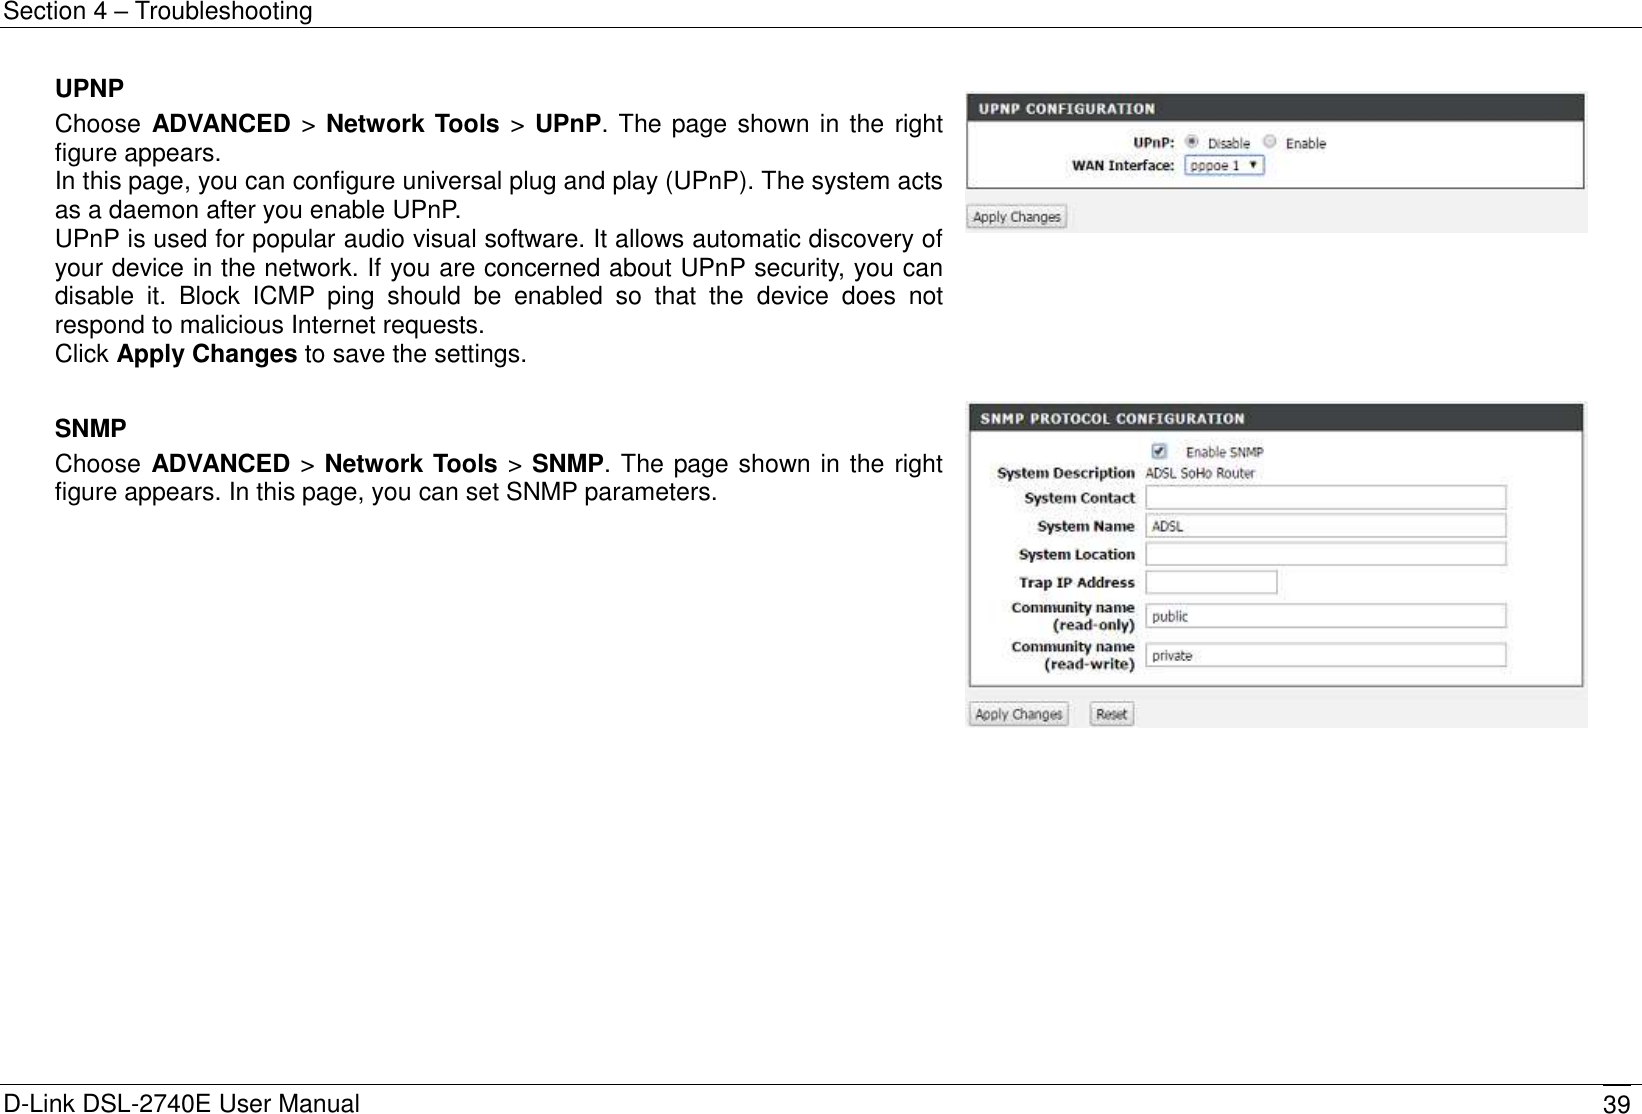 Section 4 – Troubleshooting D-Link DSL-2740E User Manual 39 UPNP Choose  ADVANCED &gt; Network Tools &gt; UPnP. The page shown in the  right figure appears. In this page, you can configure universal plug and play (UPnP). The system acts as a daemon after you enable UPnP. UPnP is used for popular audio visual software. It allows automatic discovery of your device in the network. If you are concerned about UPnP security, you can disable  it.  Block  ICMP  ping  should  be  enabled  so  that  the  device  does  not respond to malicious Internet requests. Click Apply Changes to save the settings.     SNMP Choose ADVANCED &gt; Network Tools &gt; SNMP. The page shown in the right figure appears. In this page, you can set SNMP parameters.  